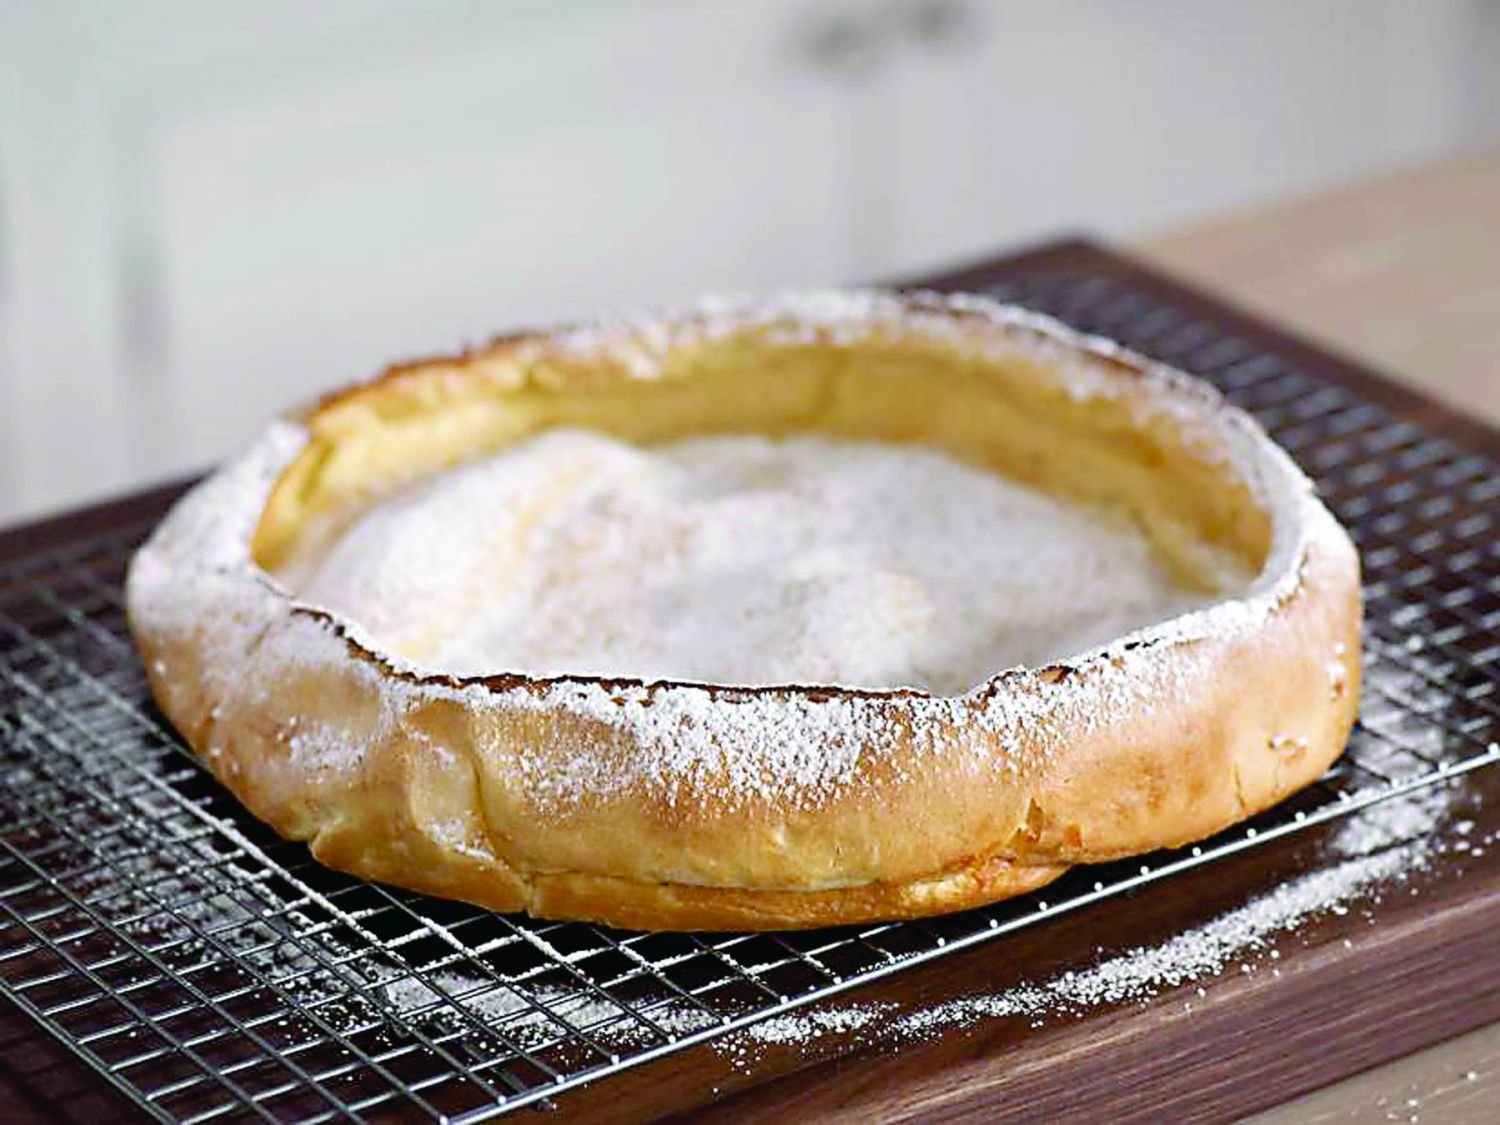 Made with butter, eggs and sugar, this puffed pancake qualifies as an indulgence worthy of Fat Tuesday, also known as Mardi Gras and Shrove Tuesday. Photograph from foodnetwork.com.